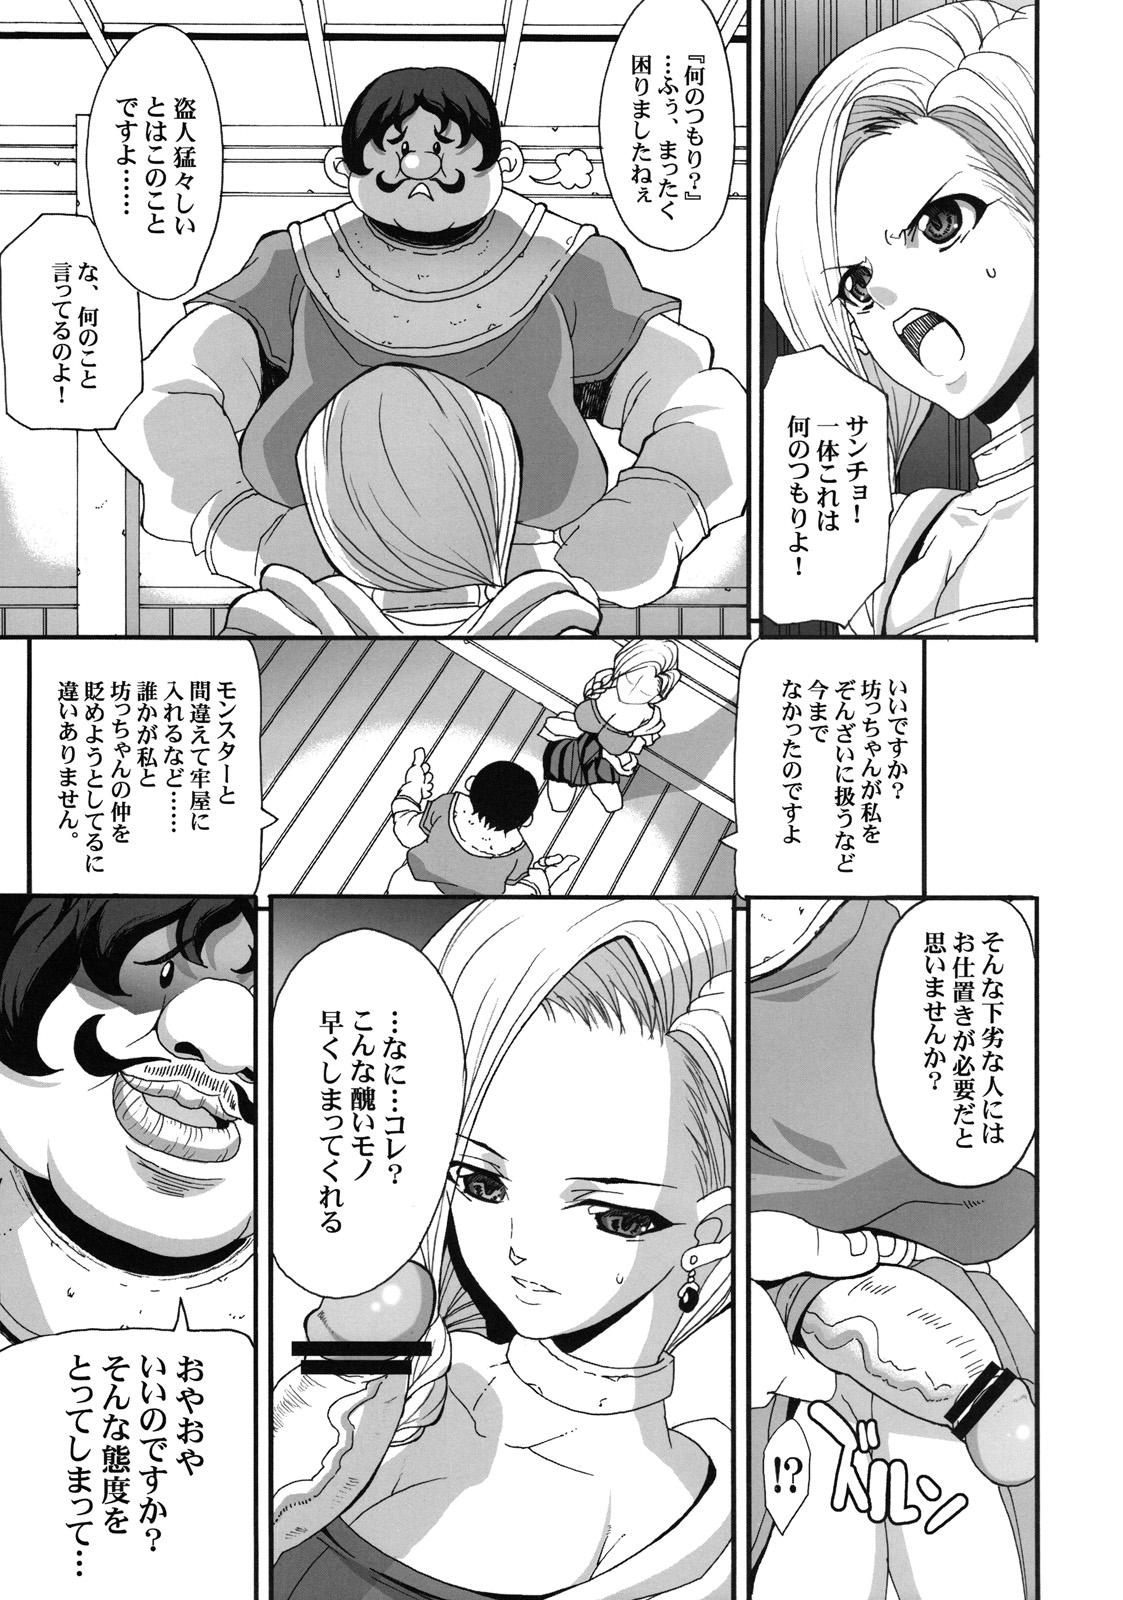 Game The Sancho - Dragon quest v Chick - Page 7